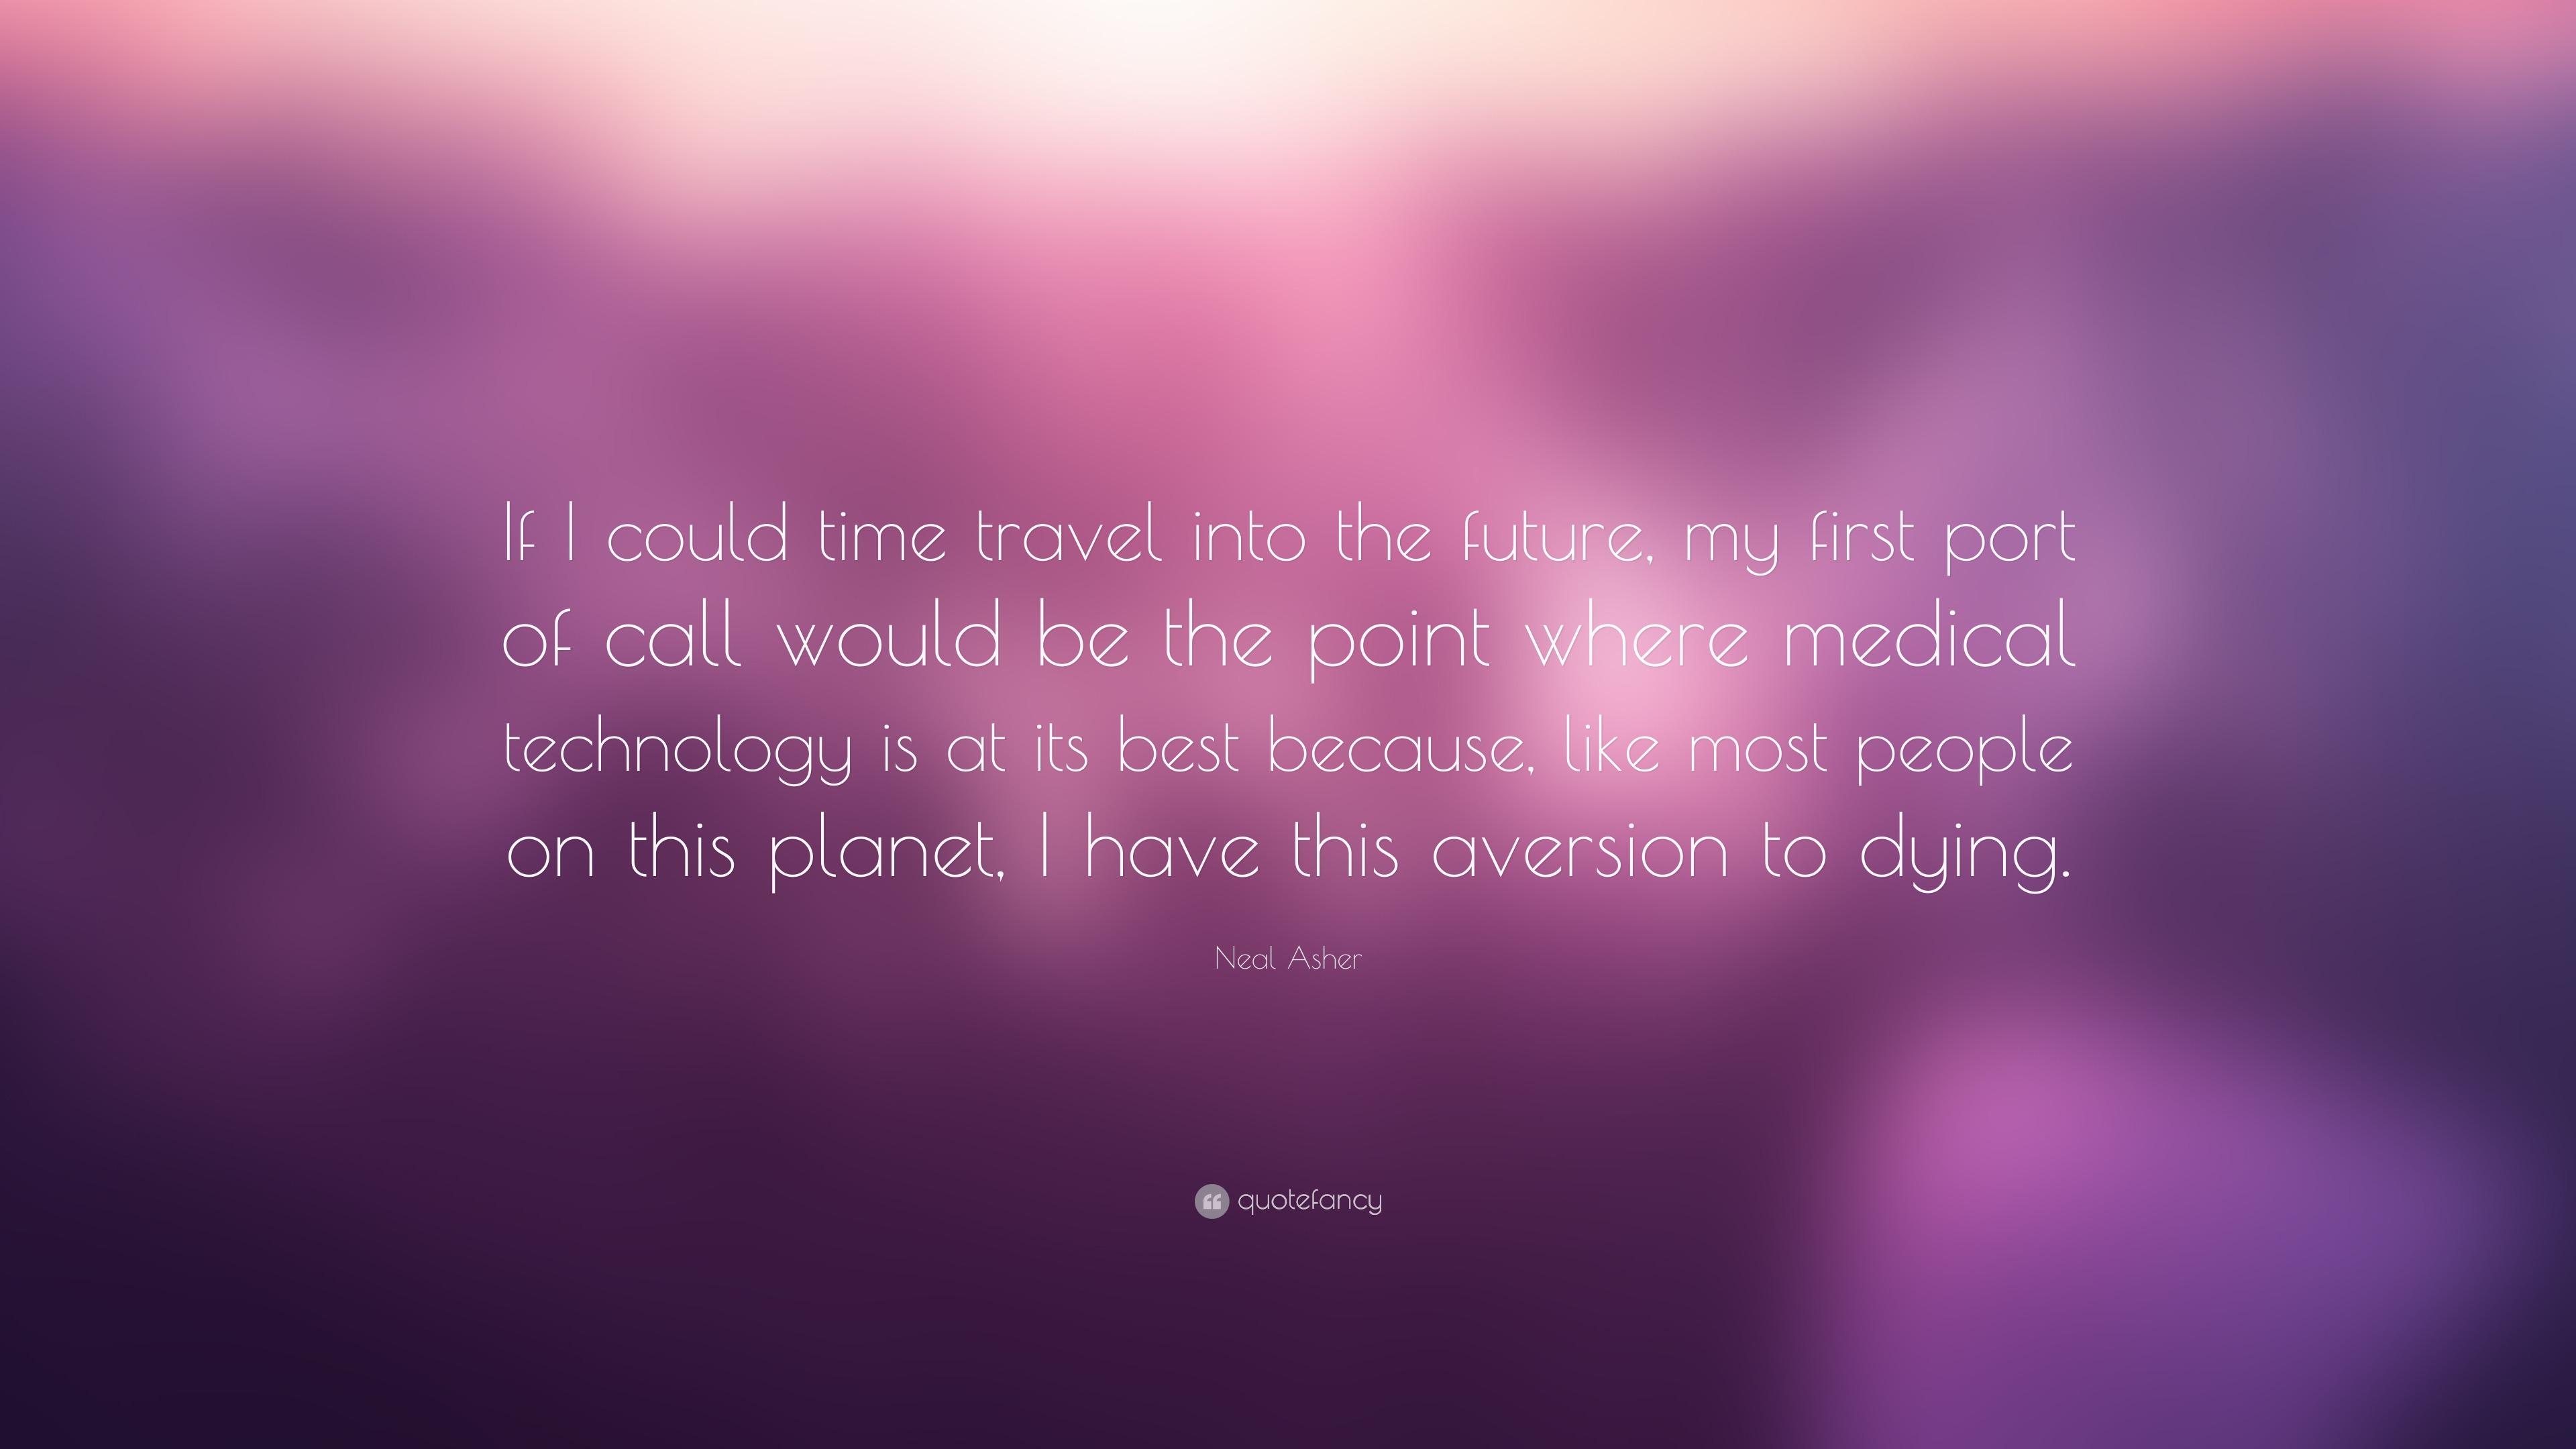 Neal Asher Quote: “If I could time travel into the future, my